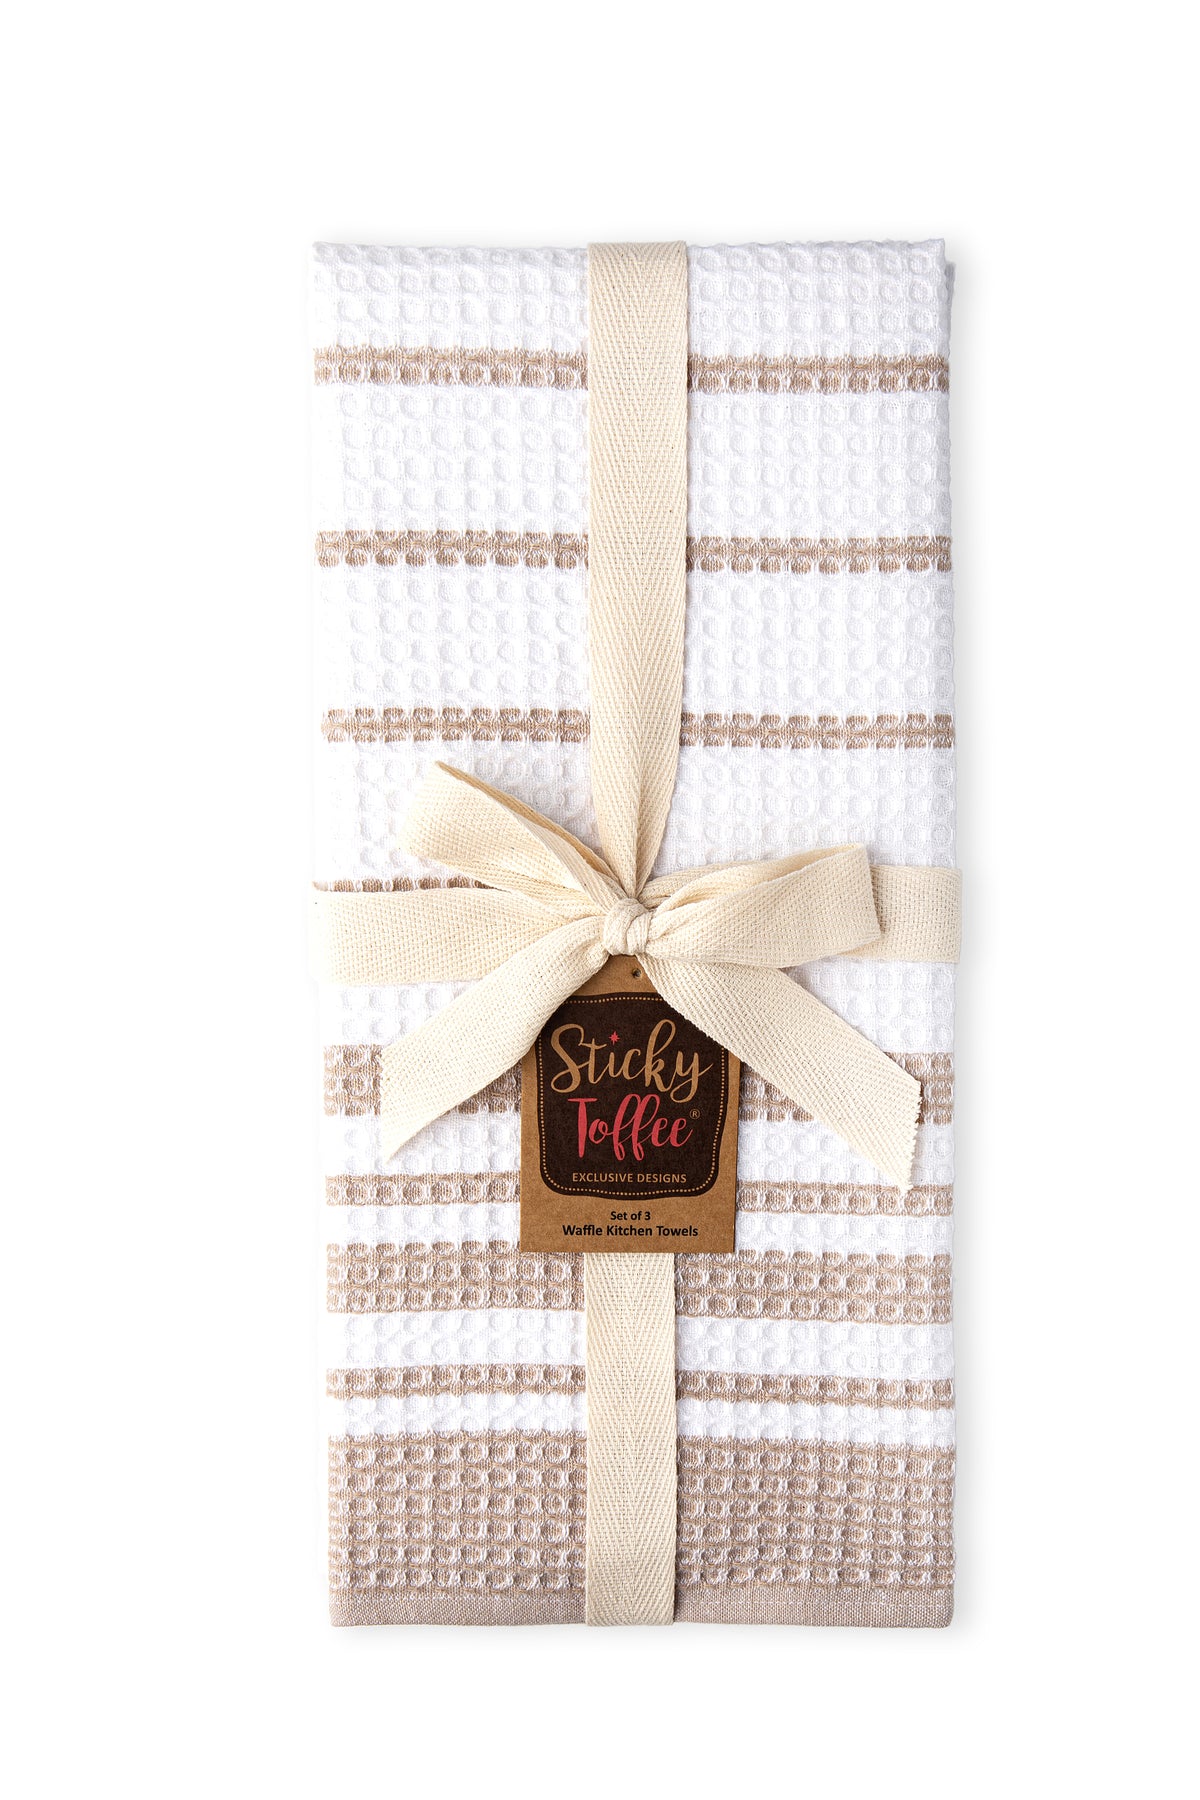 Sticky Toffee Kitchen Towels Dishcloths 100% Cotton, White Waffle Weave Bleach Friendly, Set of 8, 12 in x 12 in, Absorbent Cleaning Paperless Dish